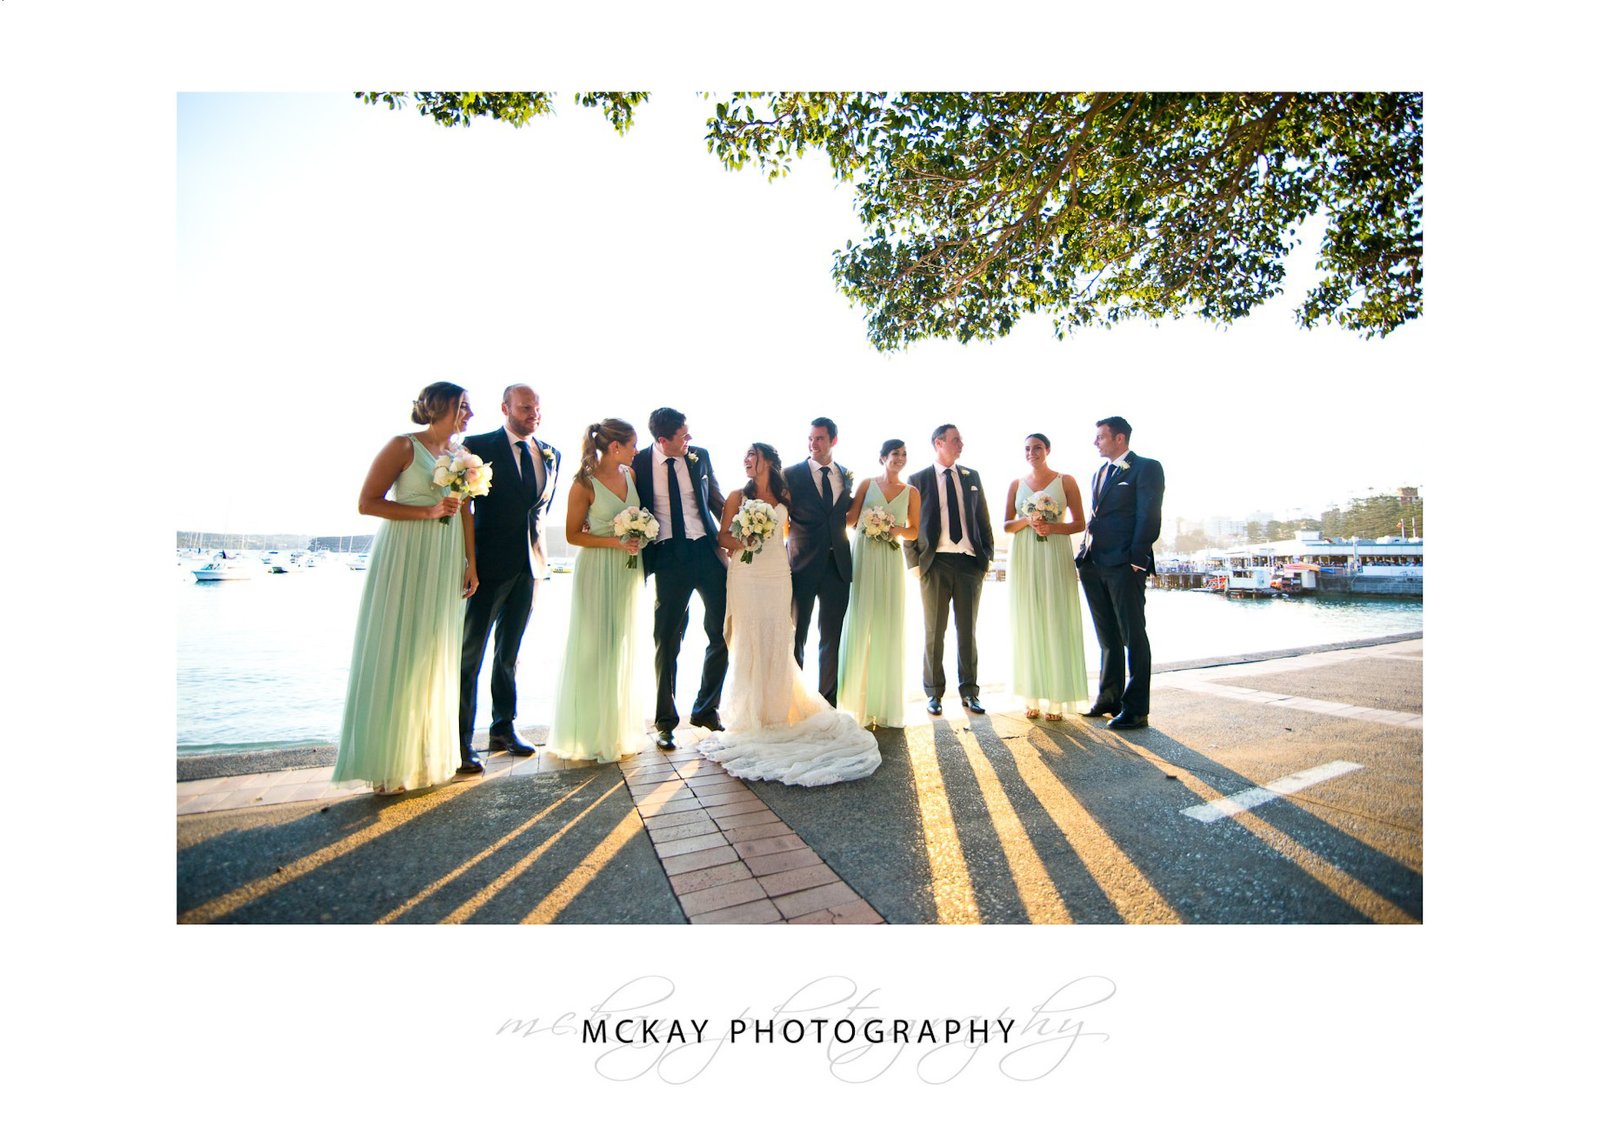 Manly Cove wedding party photo